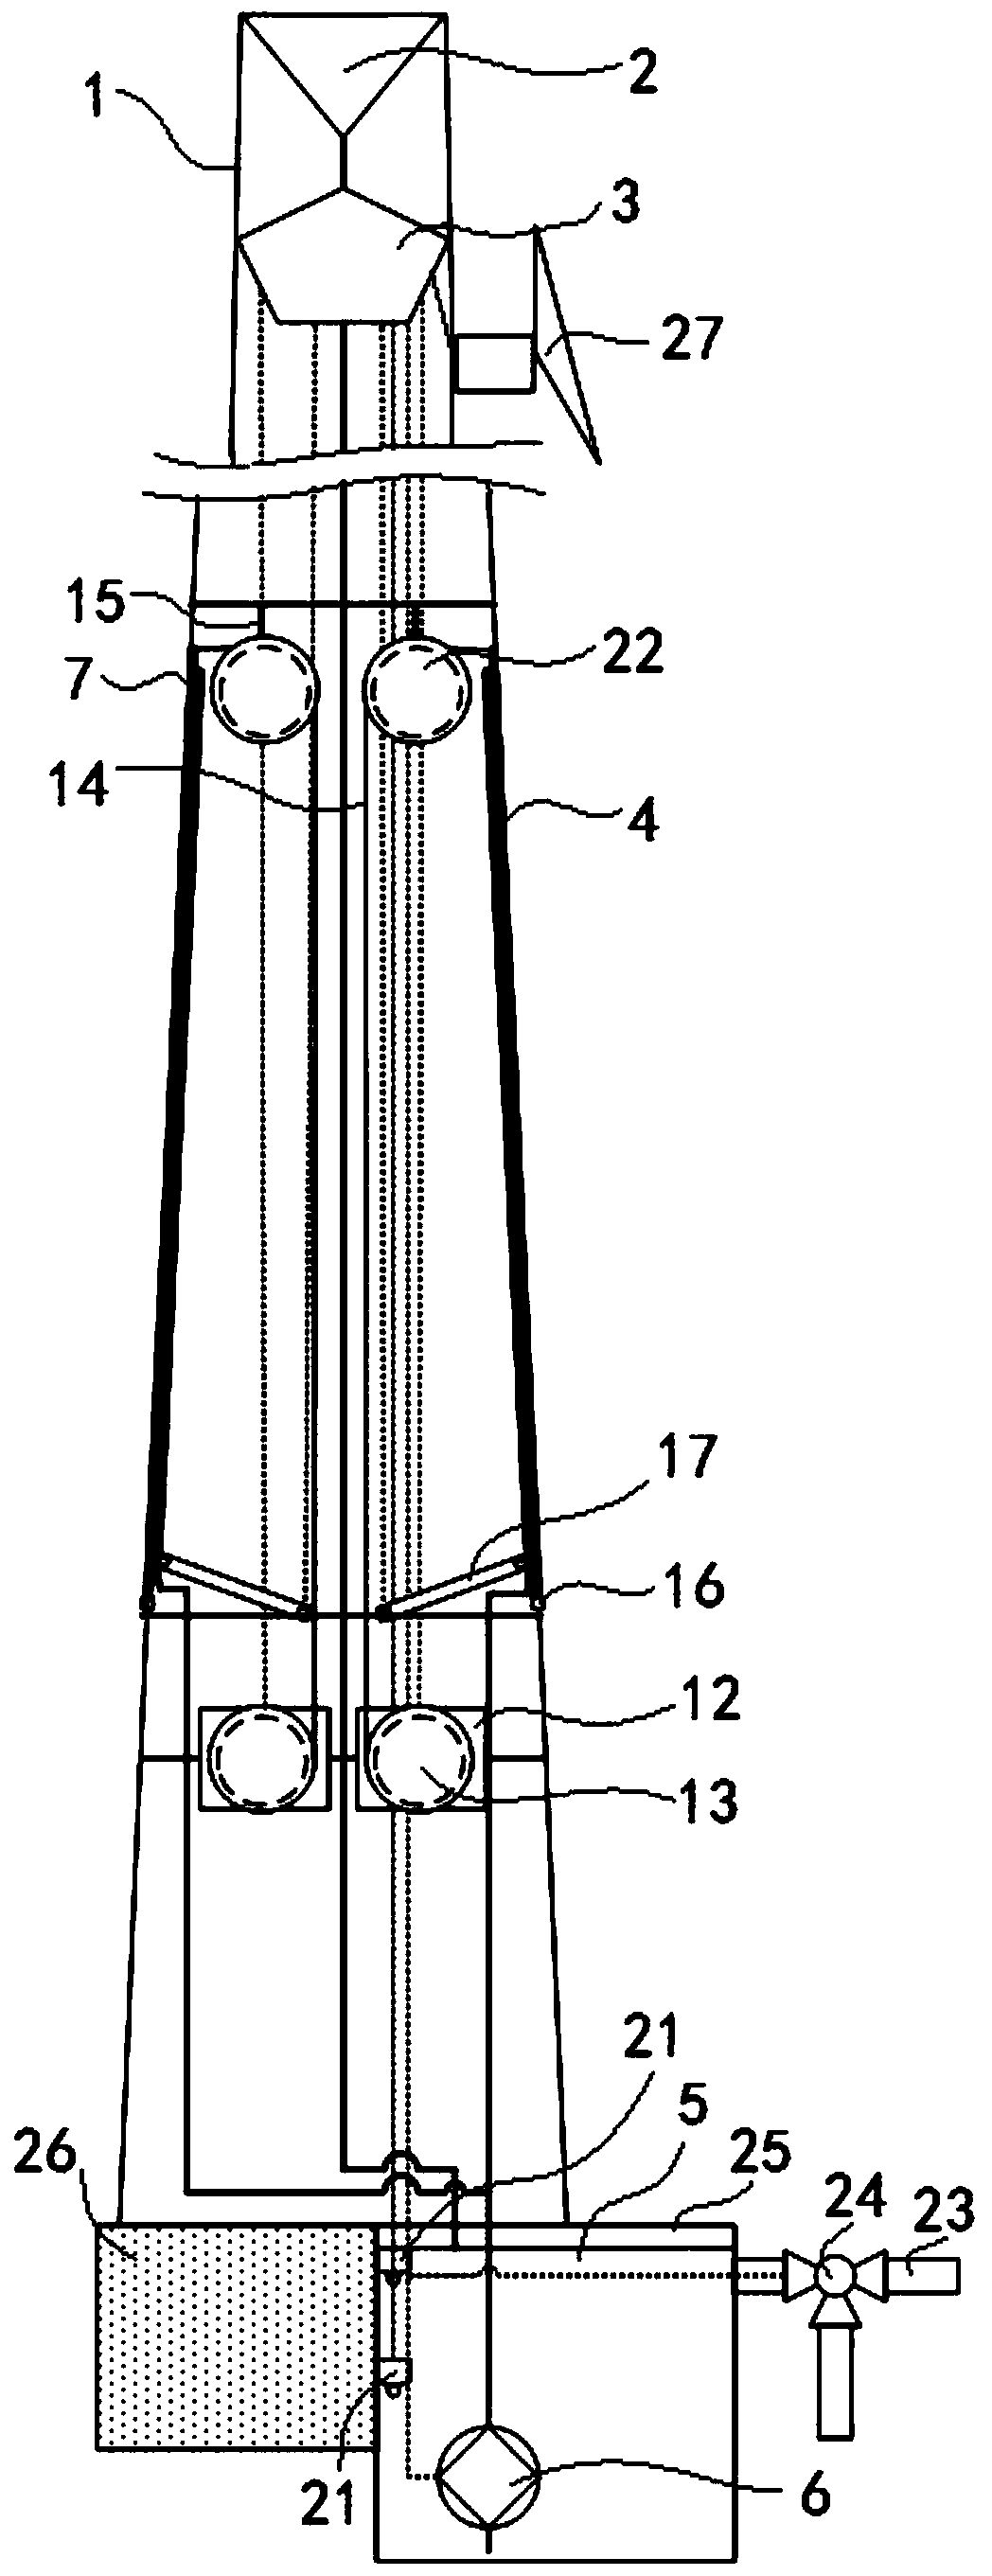 Streetlamp pole with irrigating function